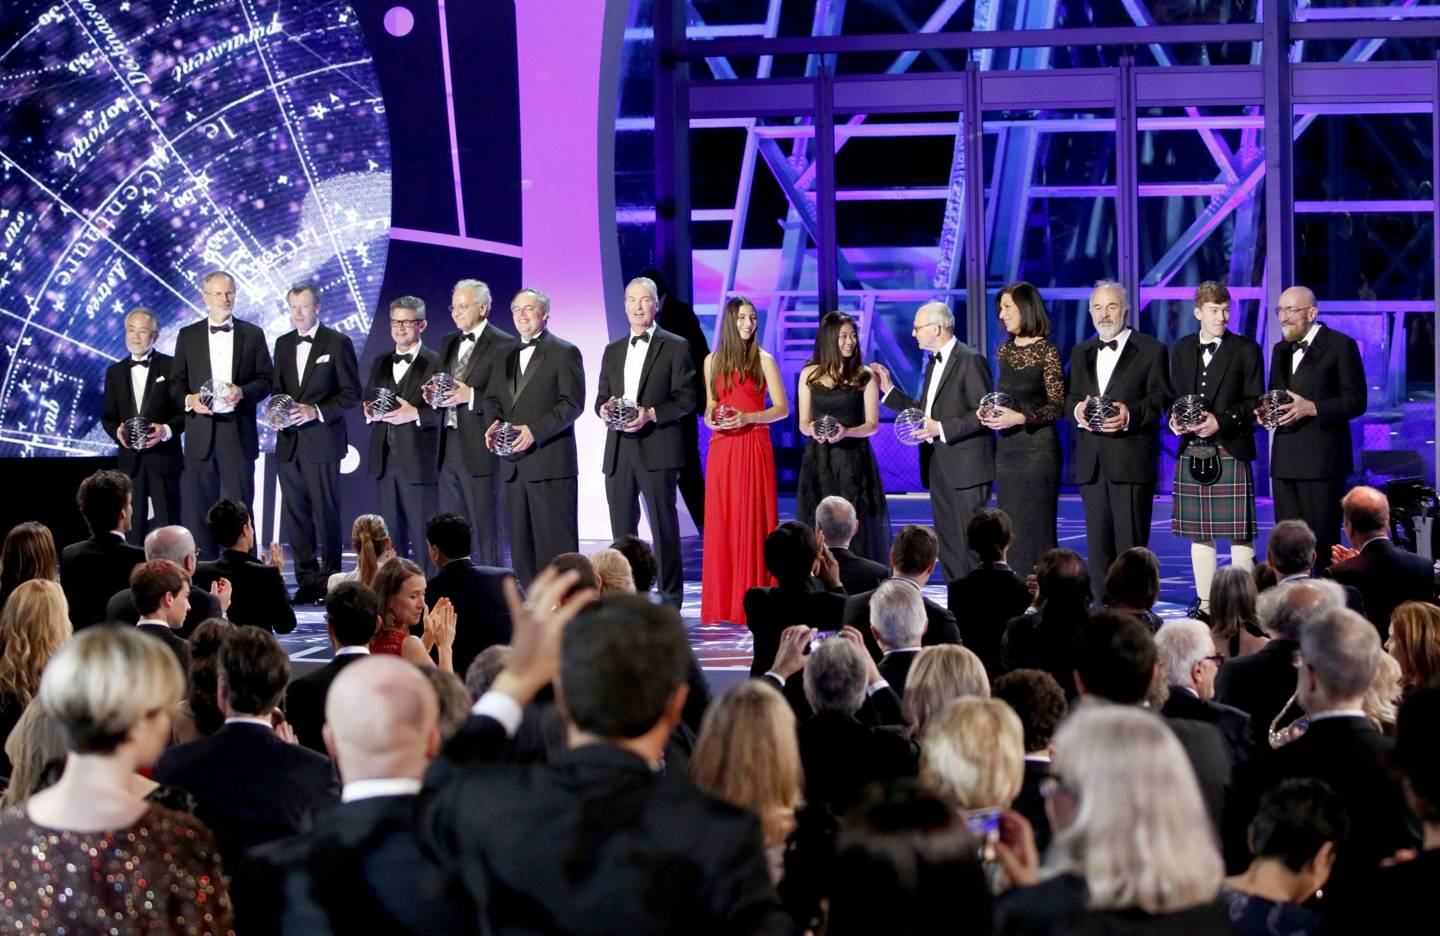 Breakthrough Prize awards 25 million to leading scientists and